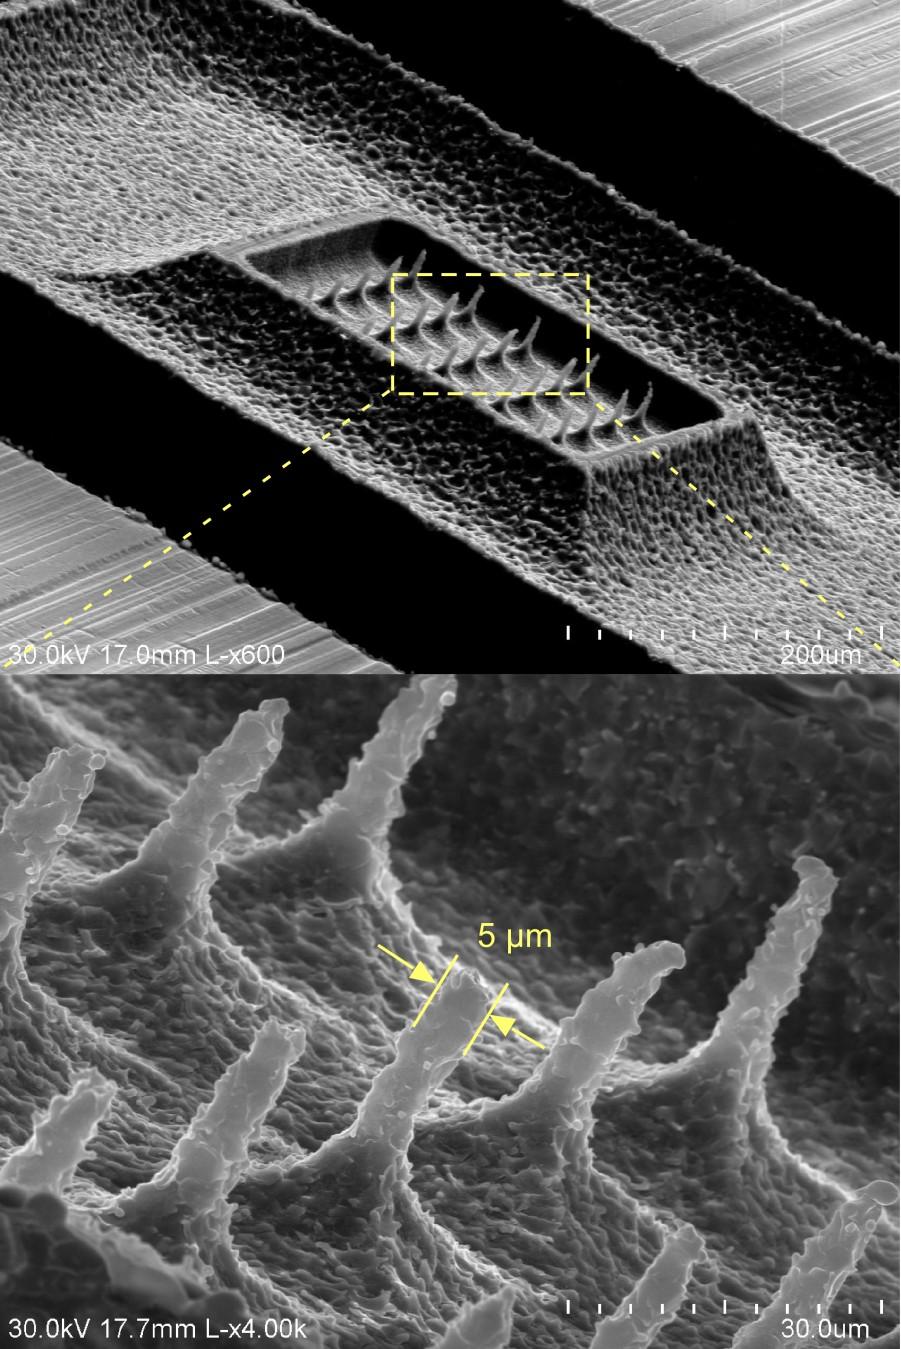 Figure 4.12: SEM image of a fabricated 5 5 stainless steel micro-tool array (unreleased).